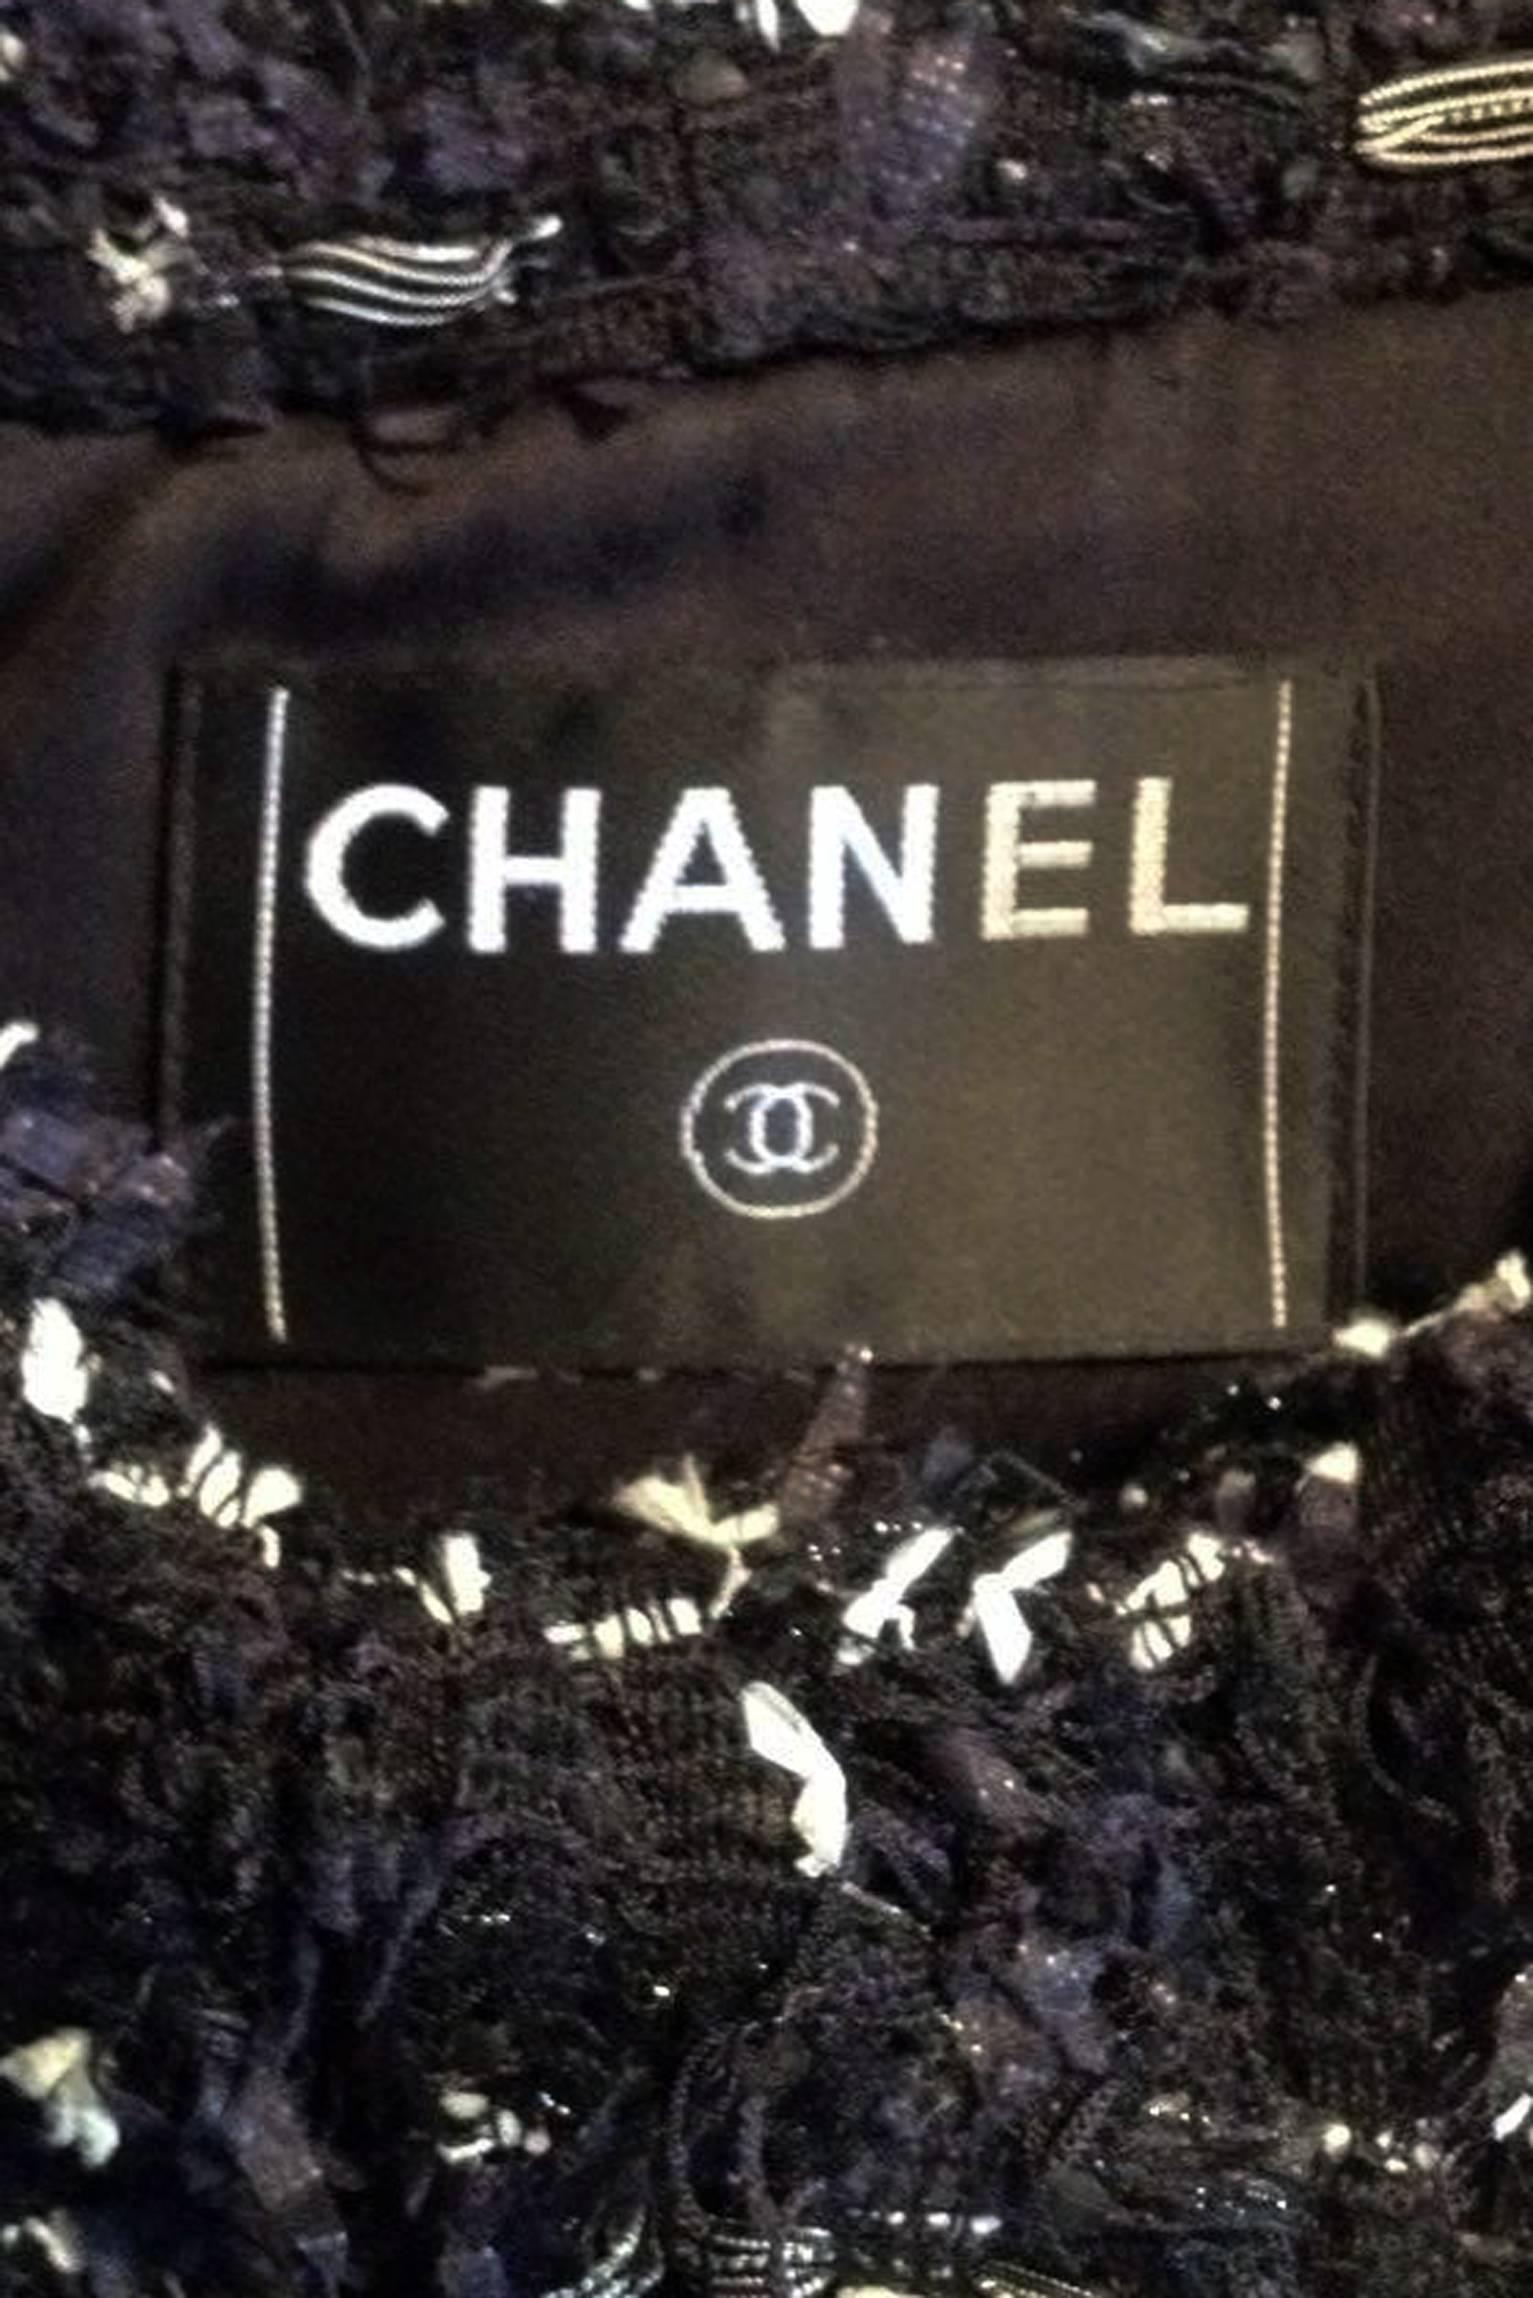 A black & whiteChanel boucle jacket with three-quarter length sleeves, a large ruffled collar, and four strategically placed patch pockets. The jacket is fully lined and closes in the front with four black novelty bottle top buttons market 